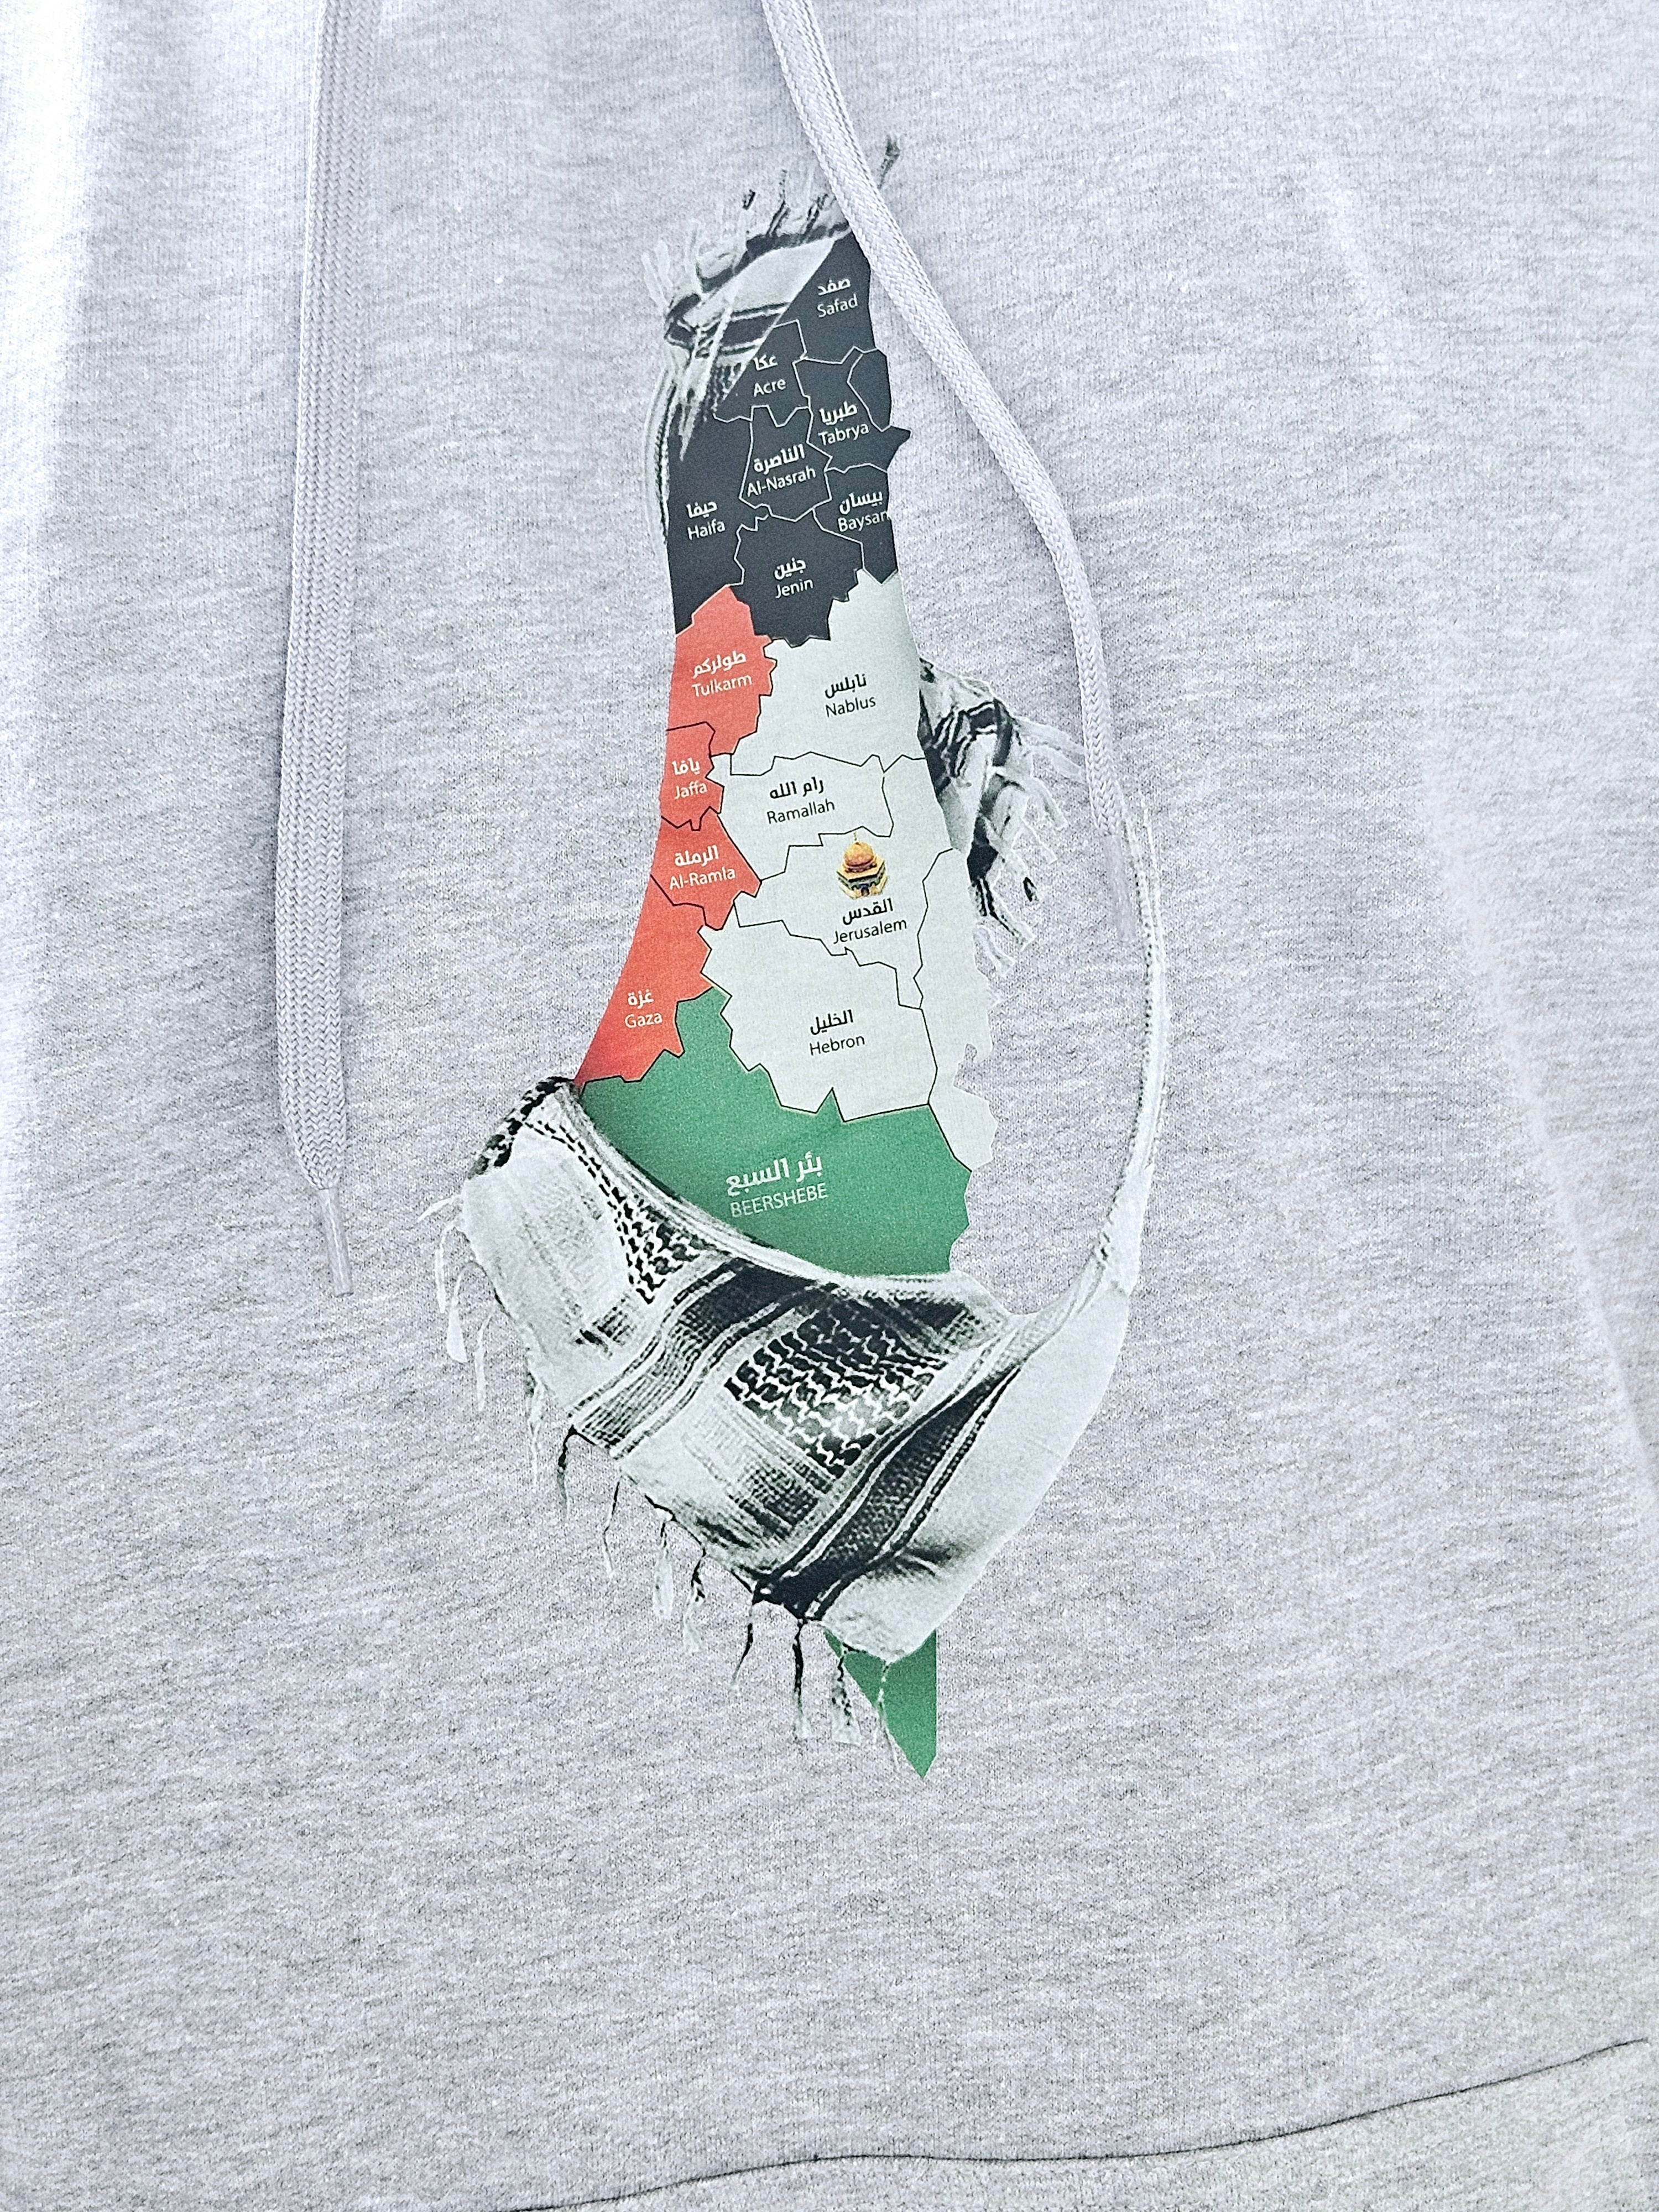 Palestine Map with Cities / Villages Hoodie, Long sleeve, or Crew Neck - Kids & Adult sizes - Habibi Heritage